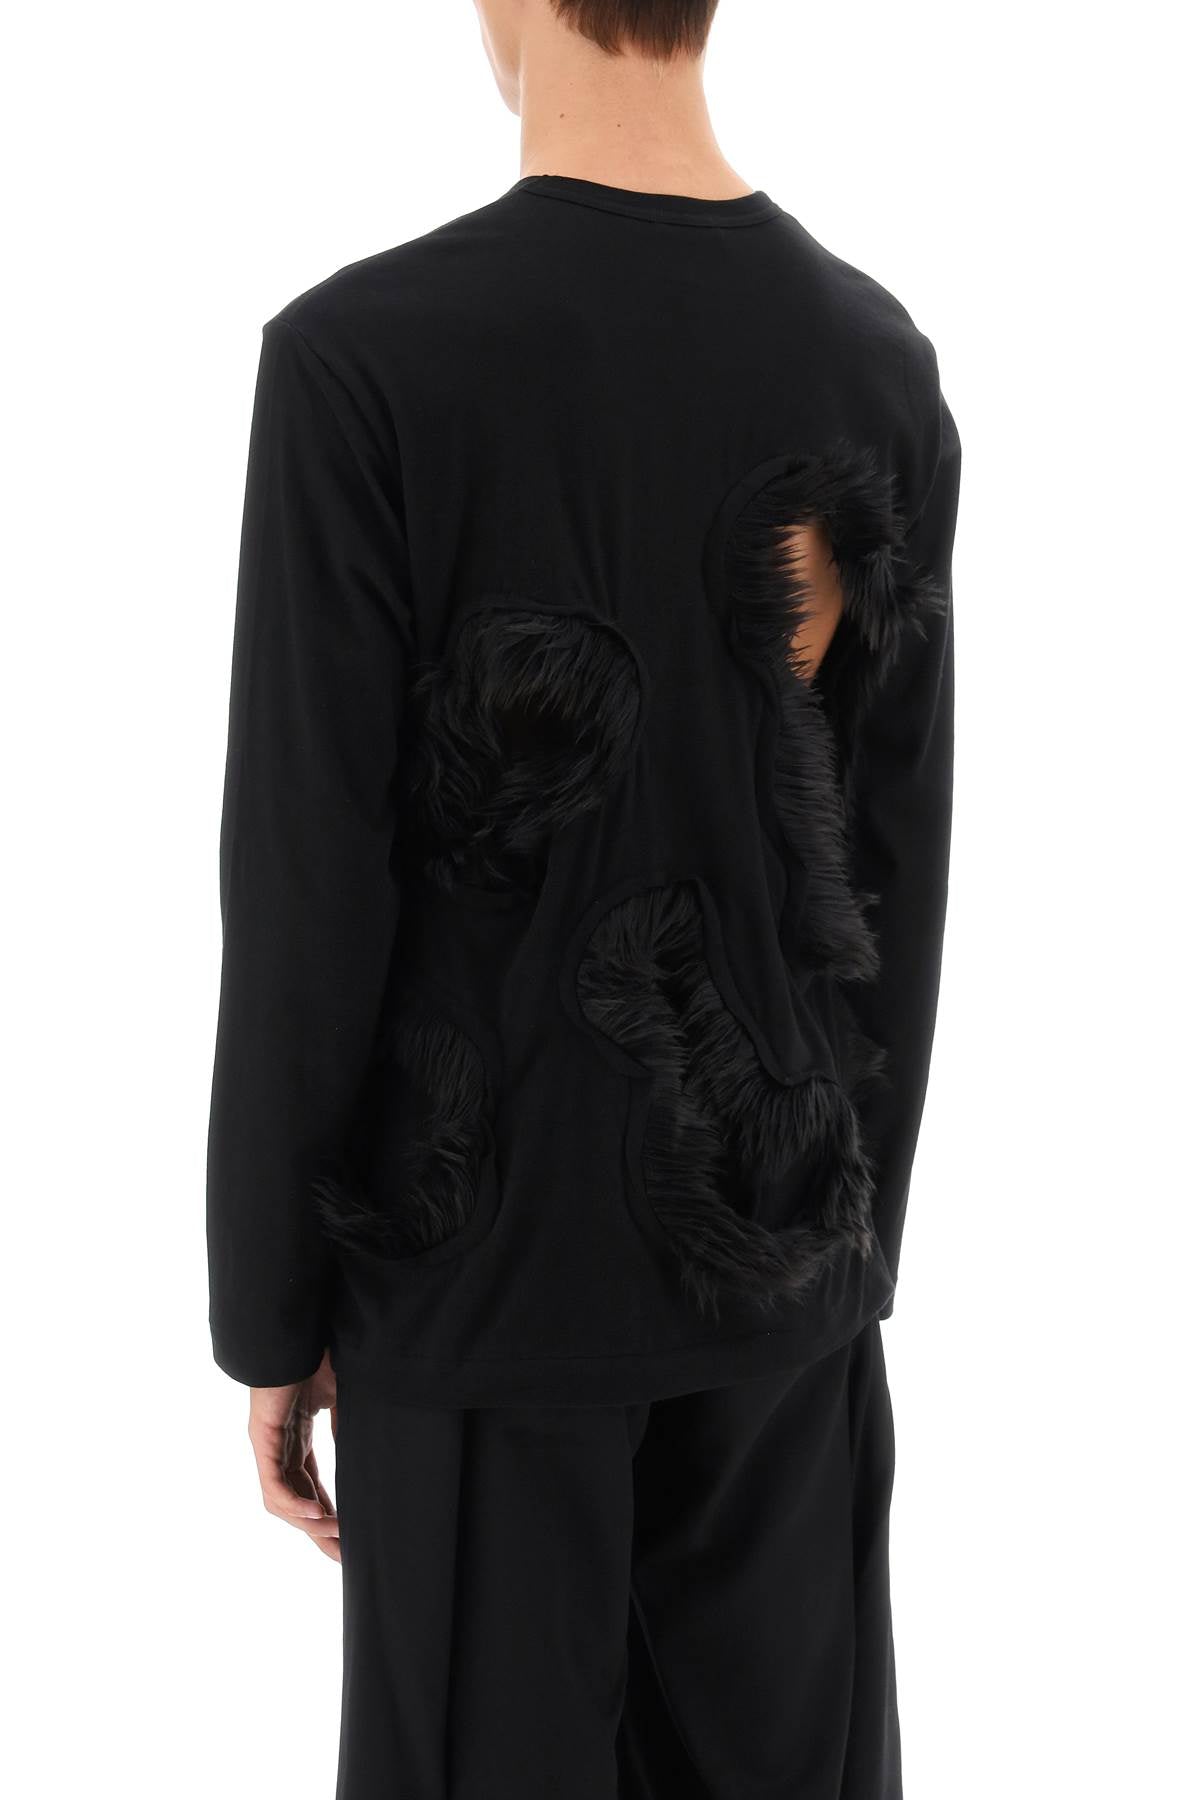 Men's Black Long-Sleeved T-Shirt with Eco-Fur Trimmed Cut-Outs